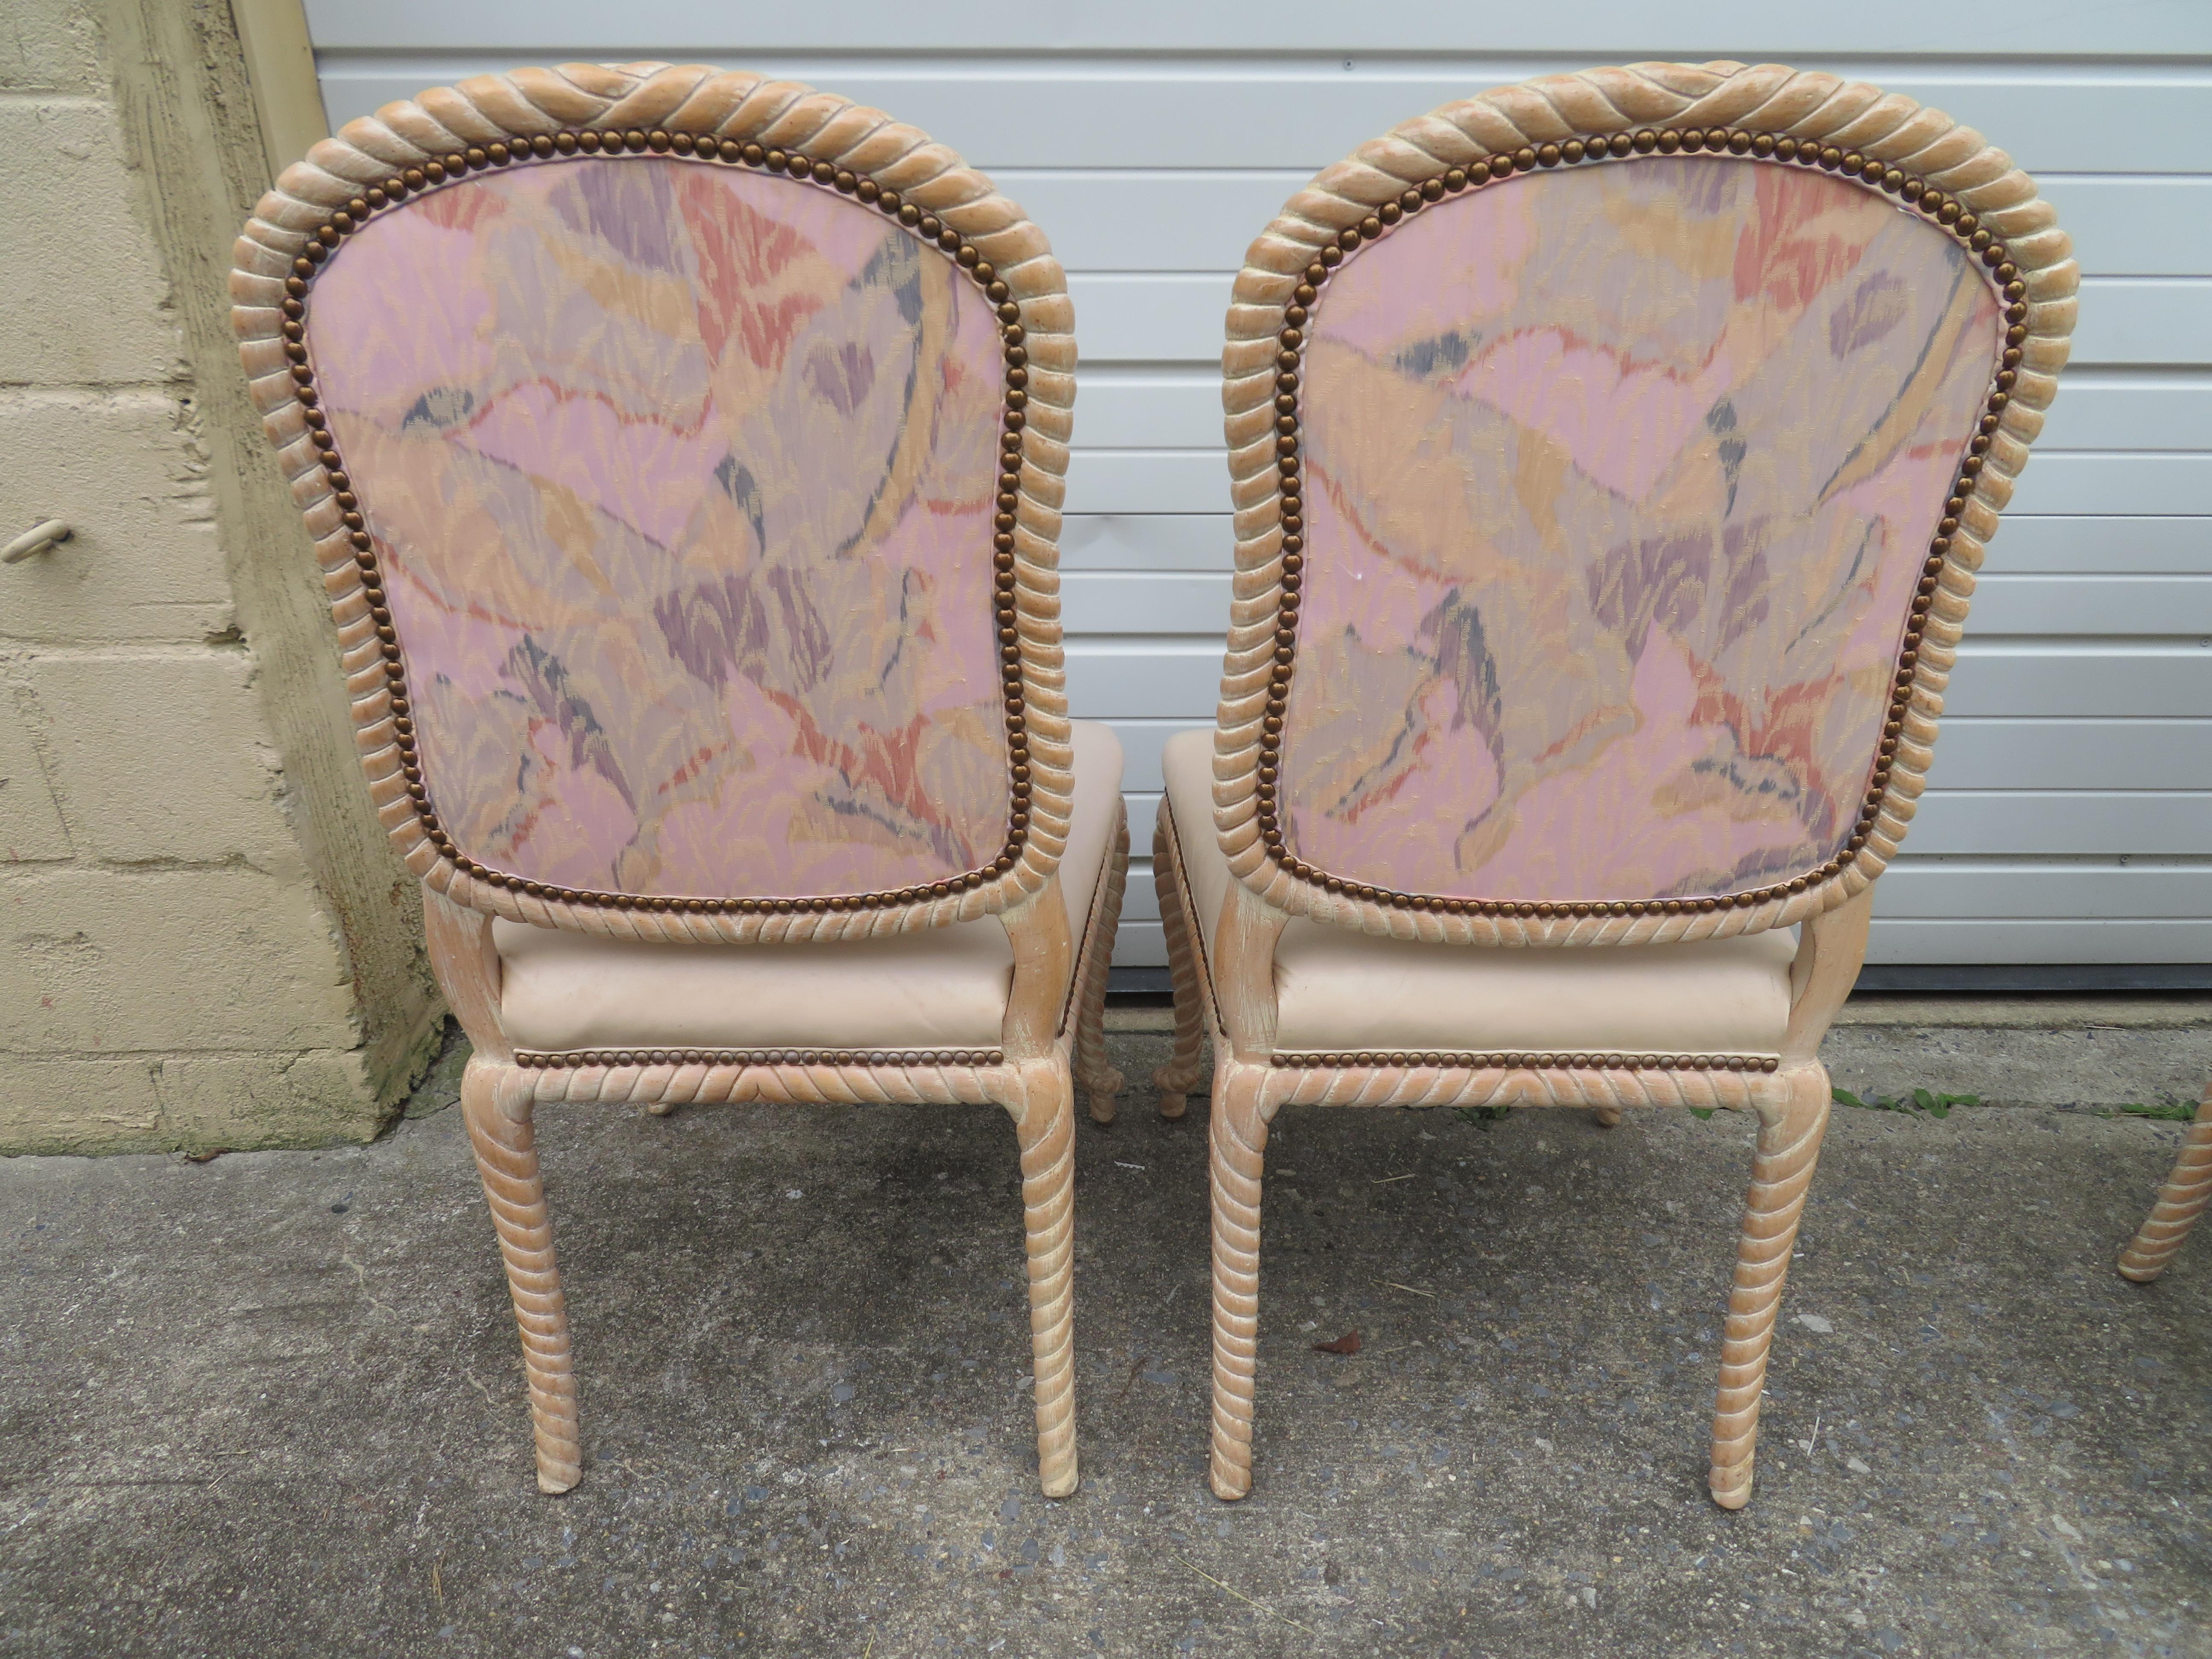 Lovely set of 4 vintage carved rope dining chairs with original leather upholstery. We love the cerused cream colored finish along with the original leather upholstery all in nice vintage condition.